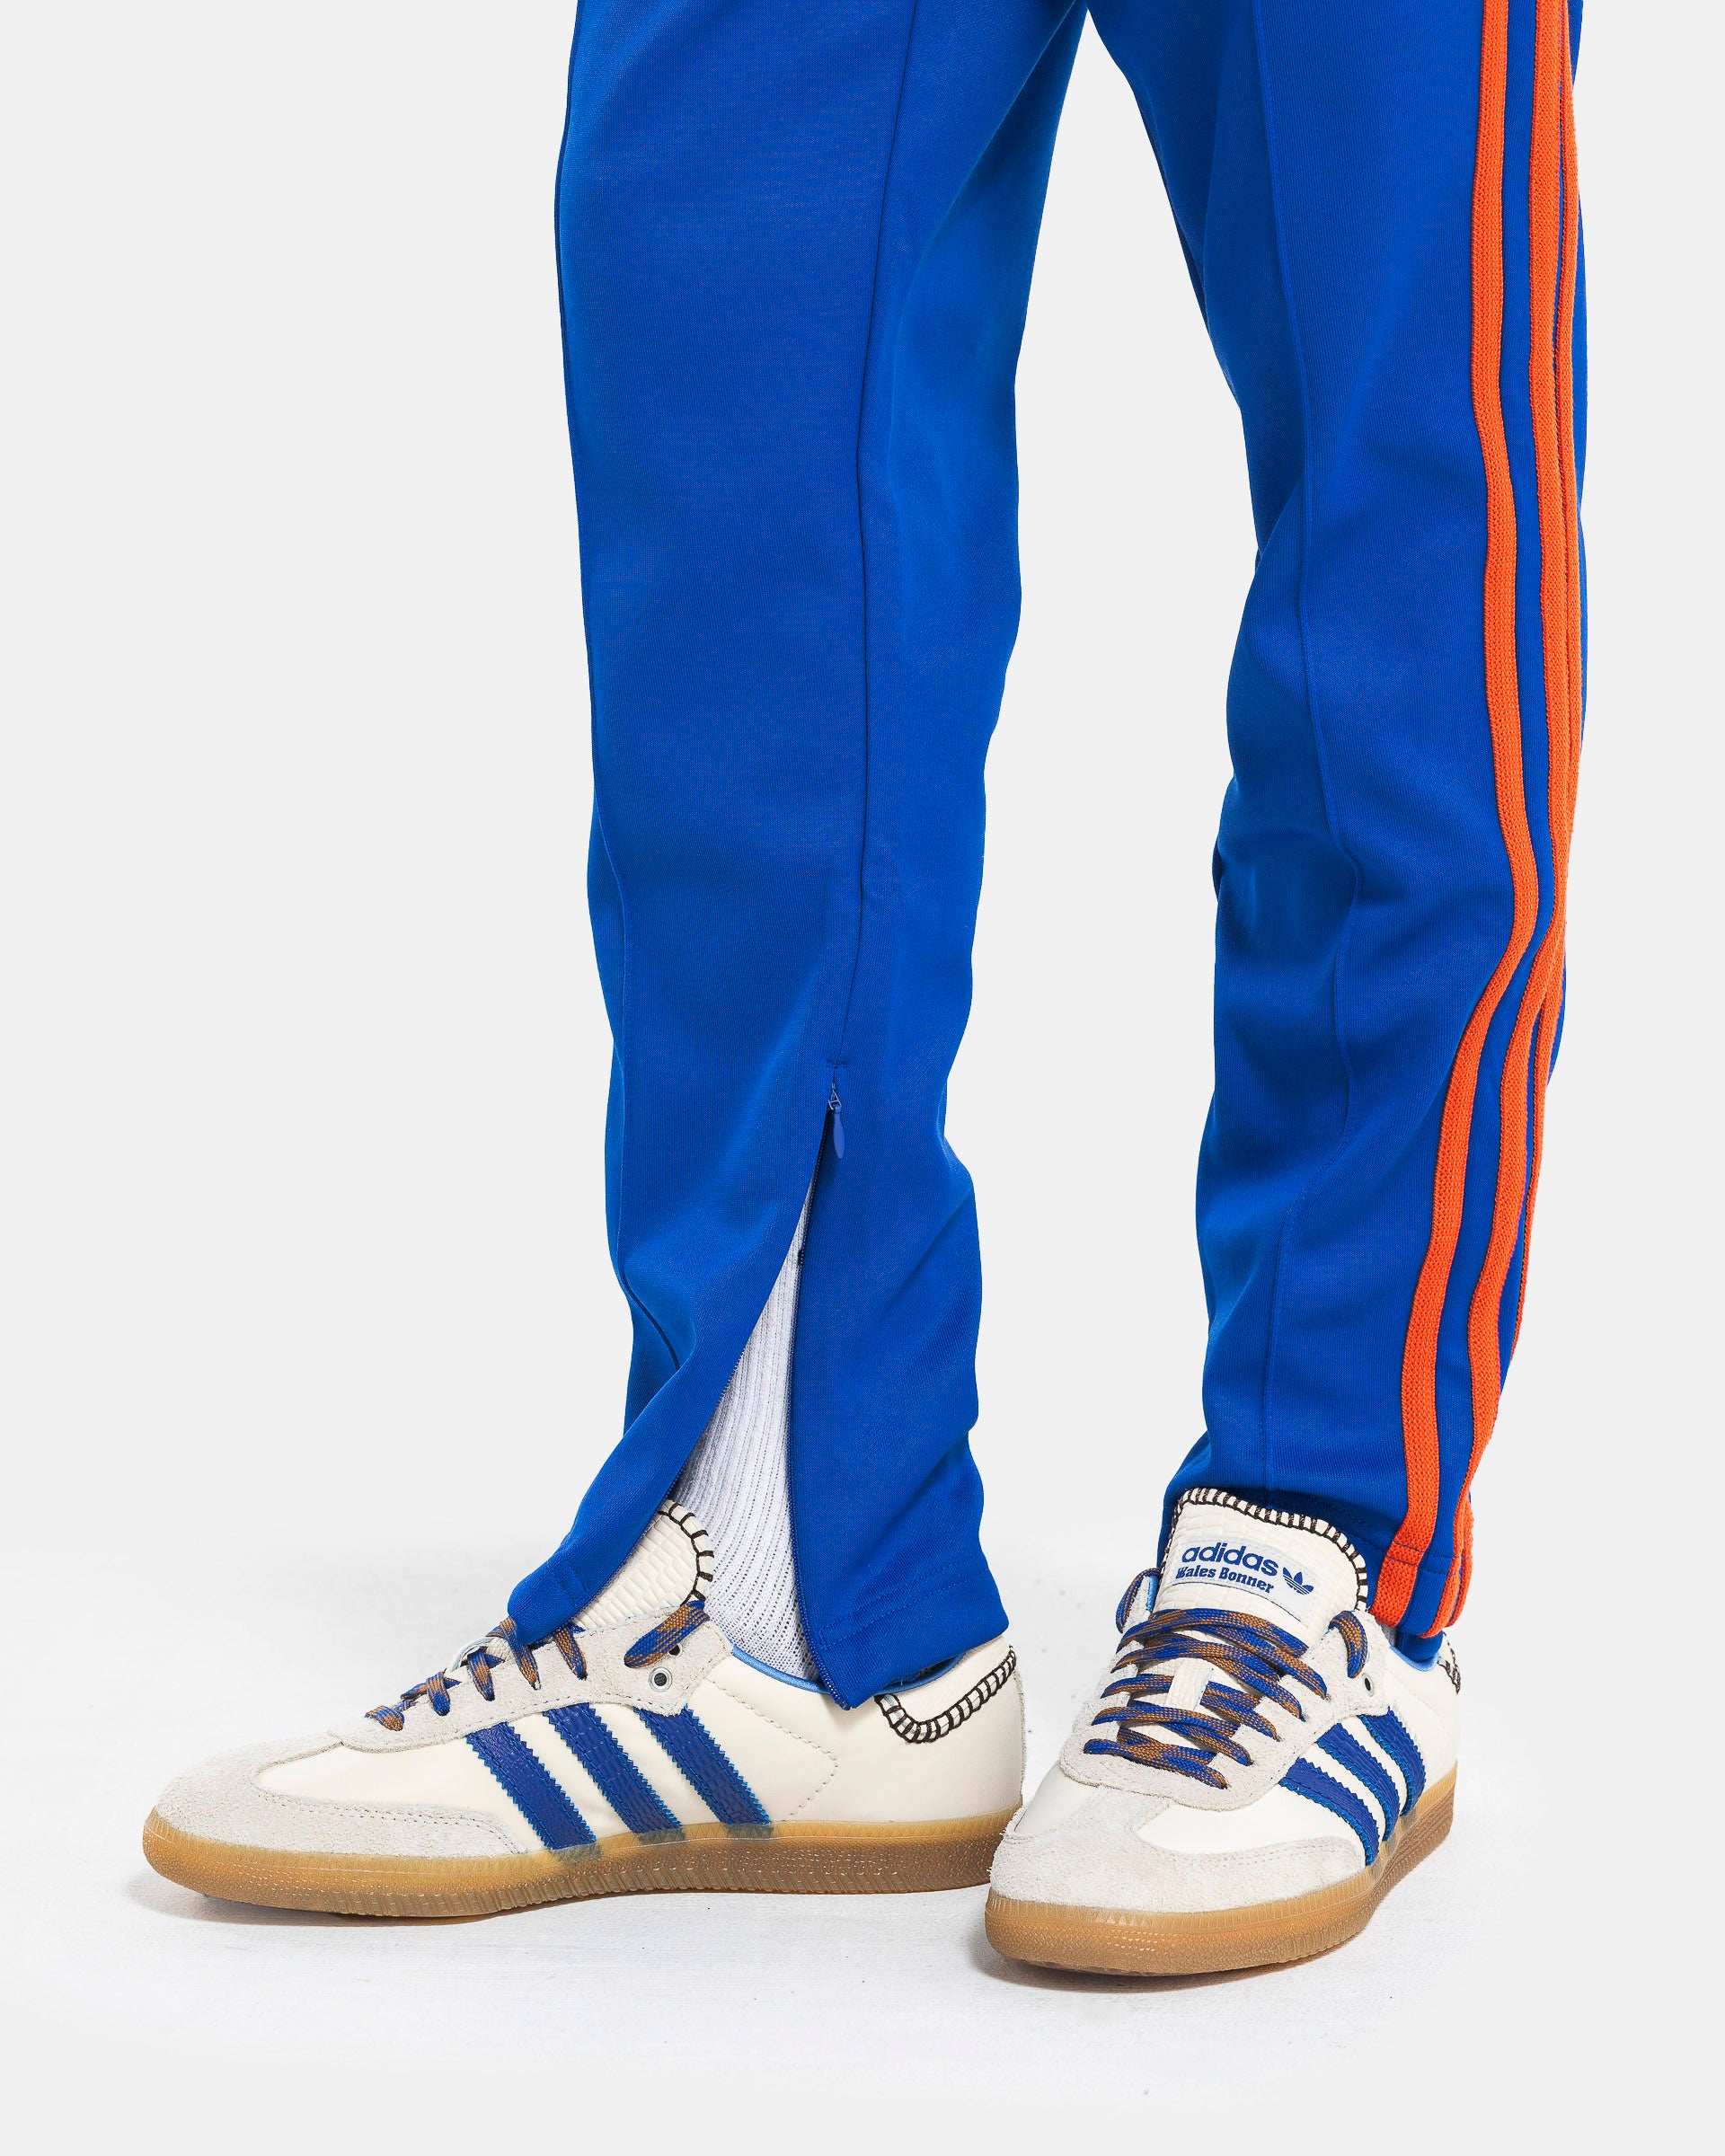 Model wearing Adidas Wales Bonner Jersey Stirrup Track Pant in Team Royal Blue on the white background